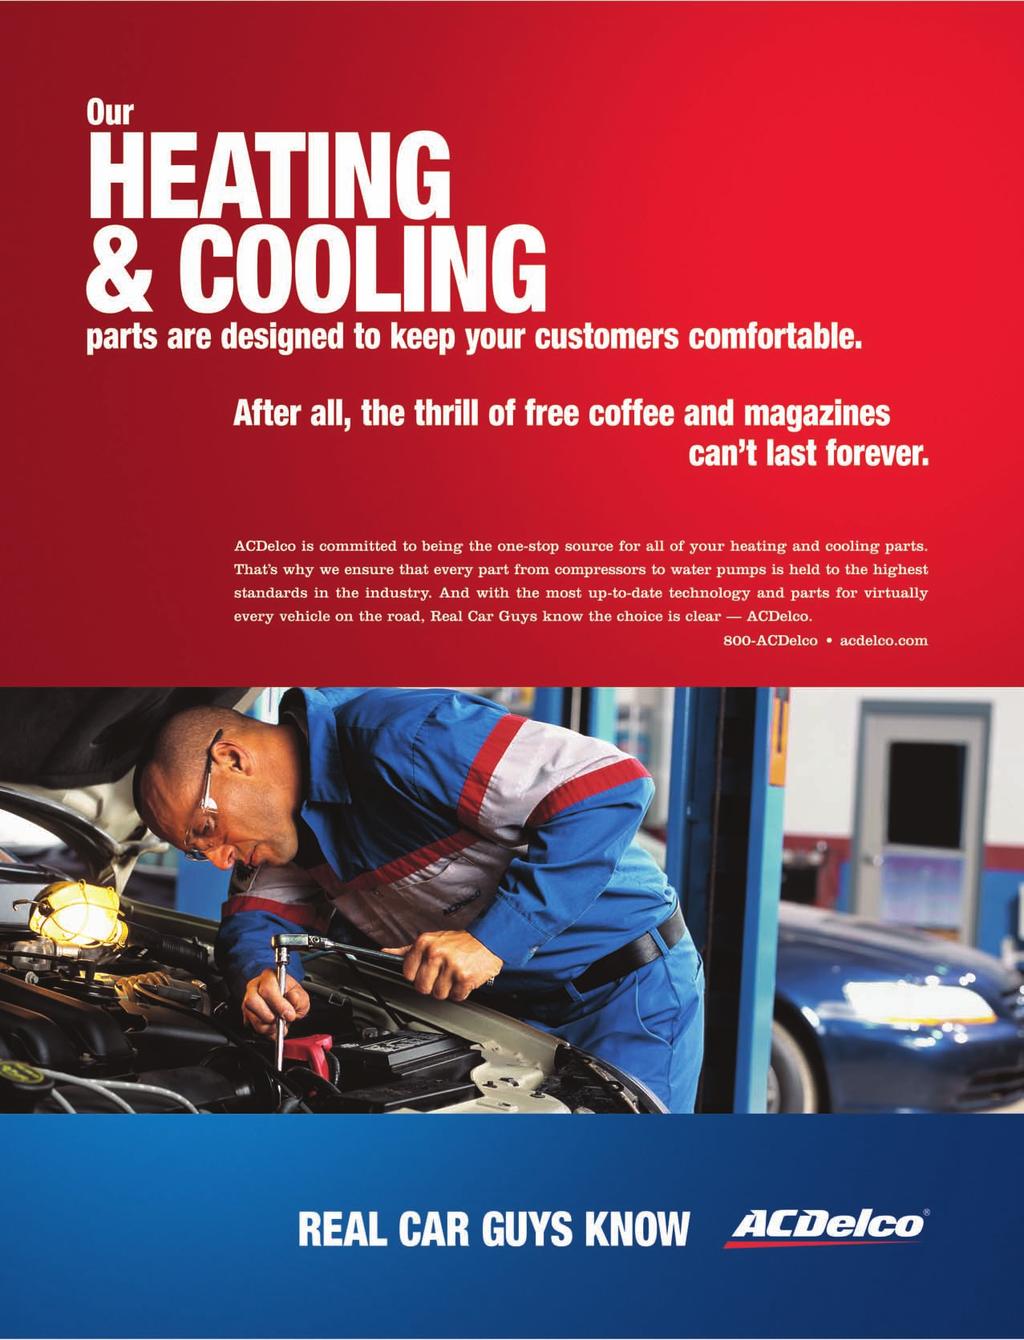 The area where the coolant comes into contact with the wet-sleeve cylinder liners is extremely hot. Localized boiling occurs, regardless of coolant type.